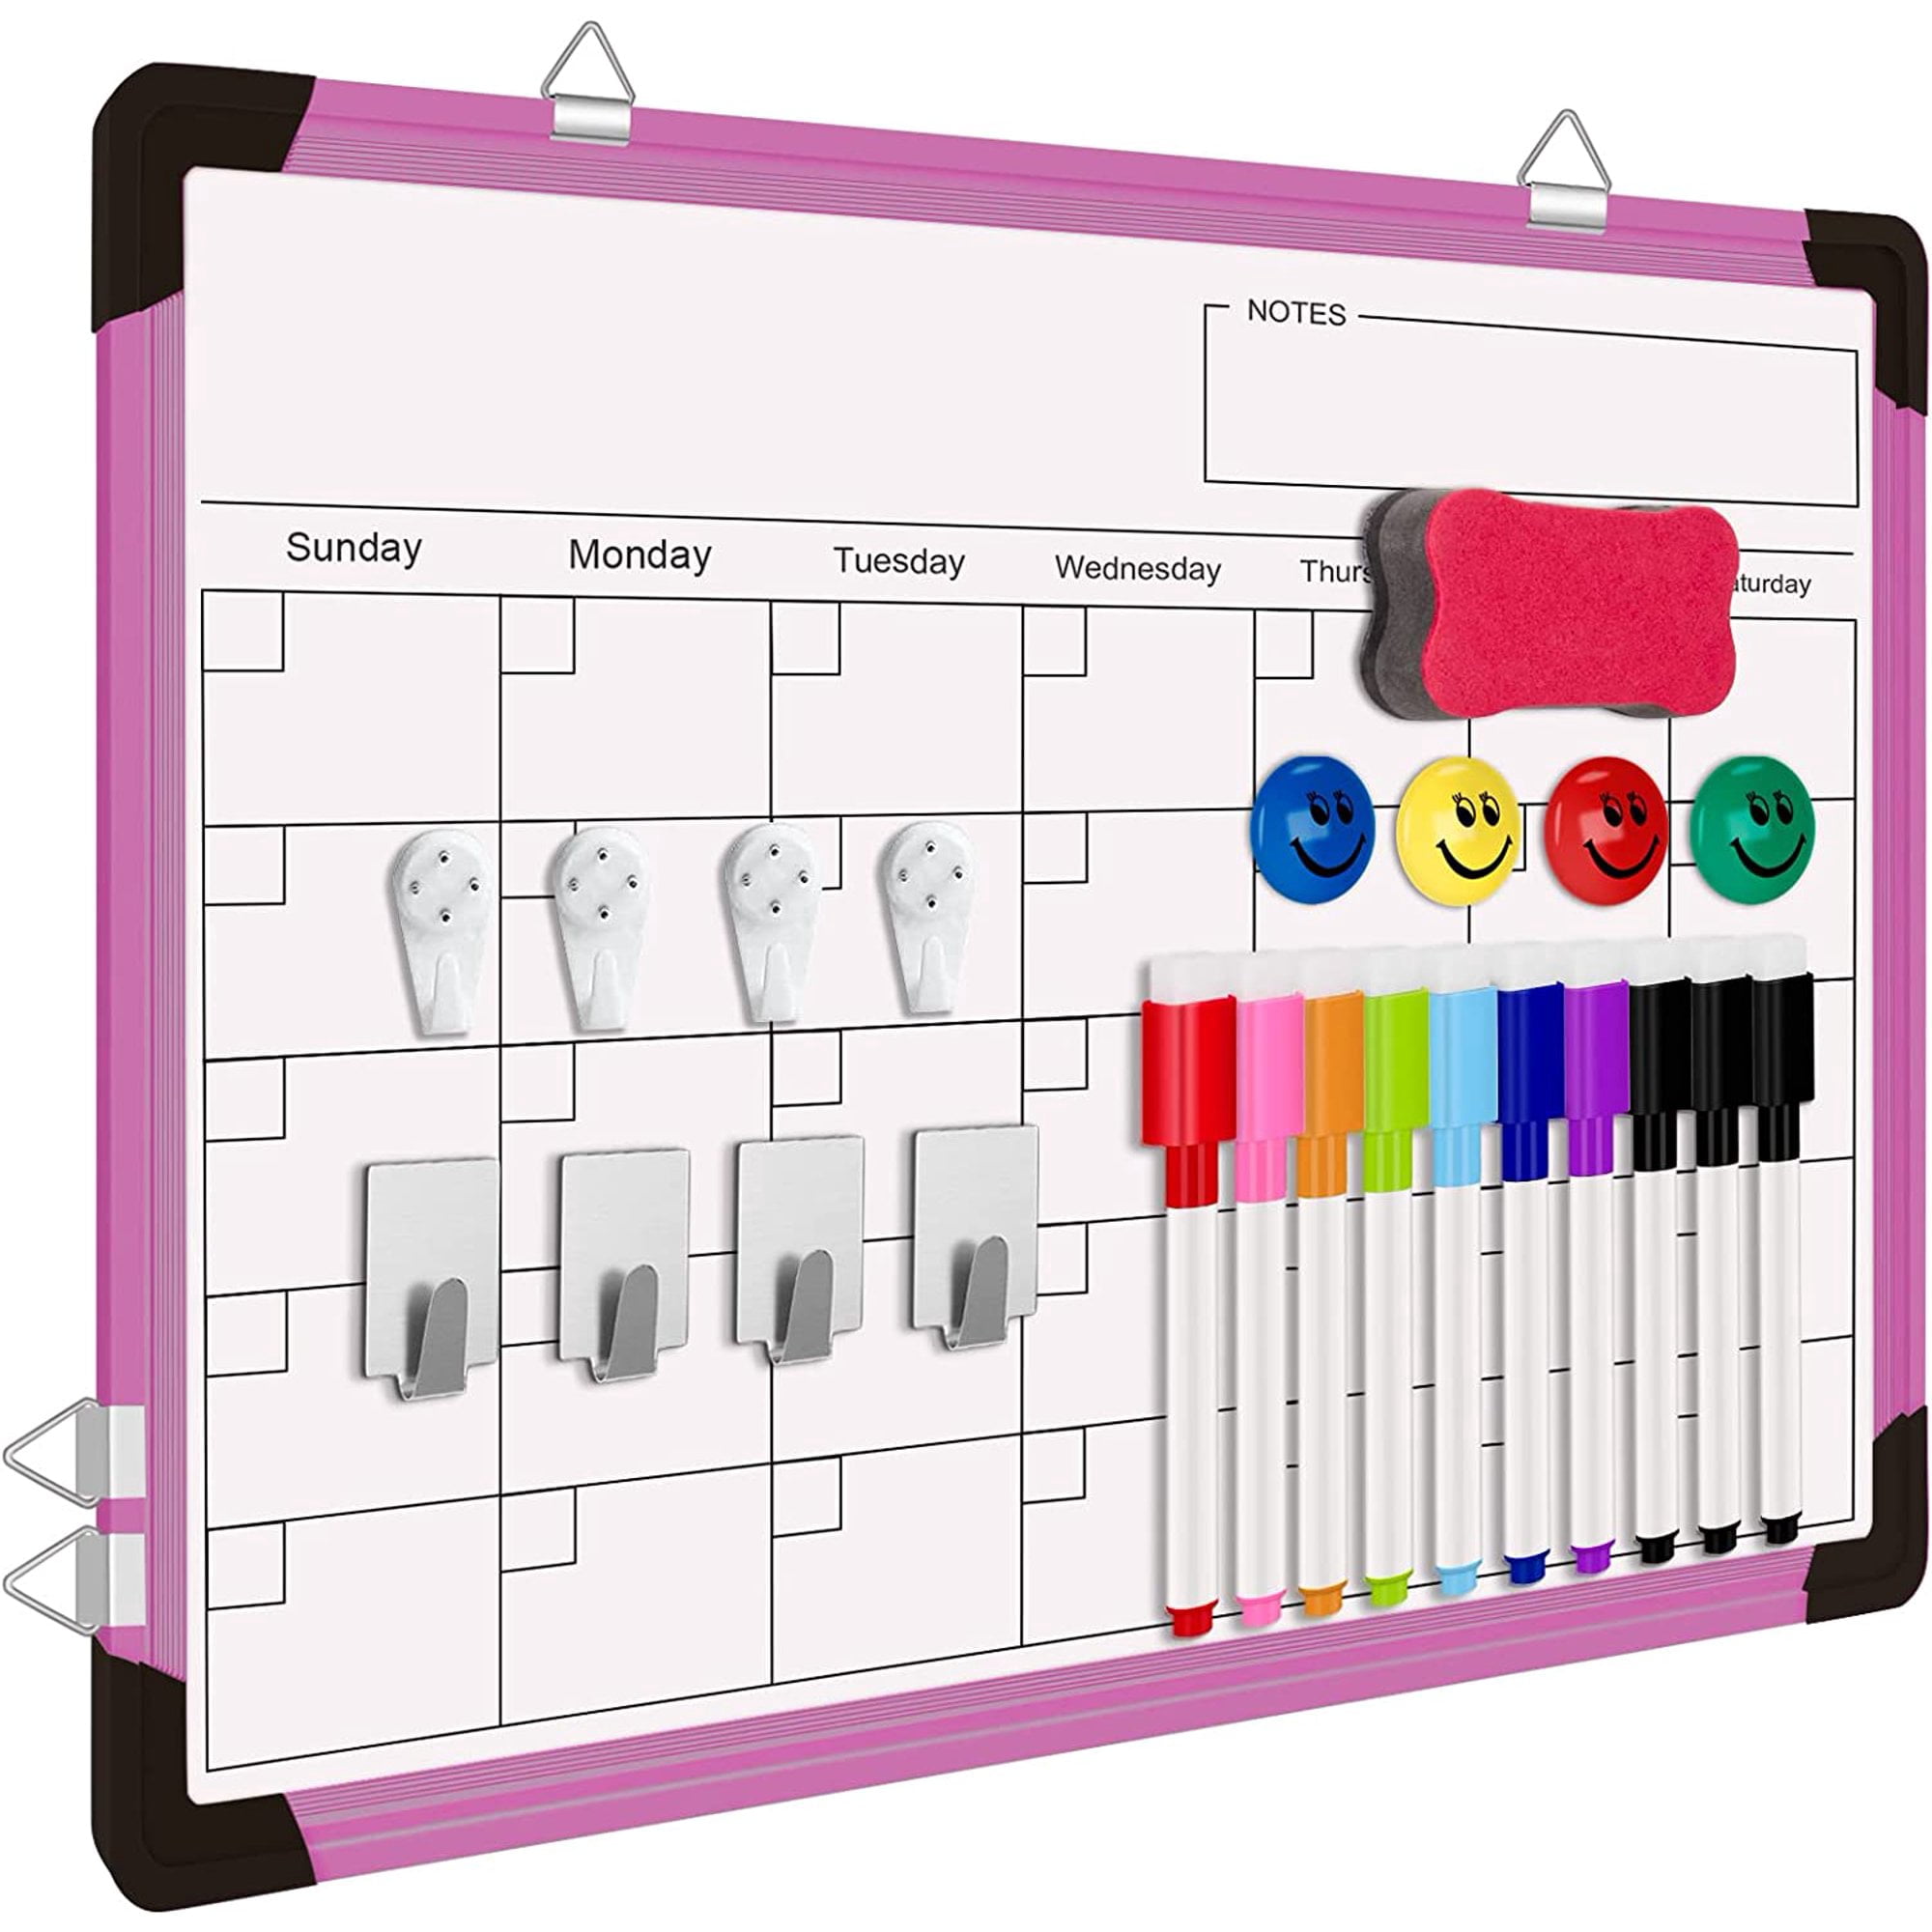 Bright Creations 1-Pack Dry Erase Reusable and Customizable Magnetic Tape Roll for Organizing Packaging, Classroom Whiteboard Reminders, Calendar